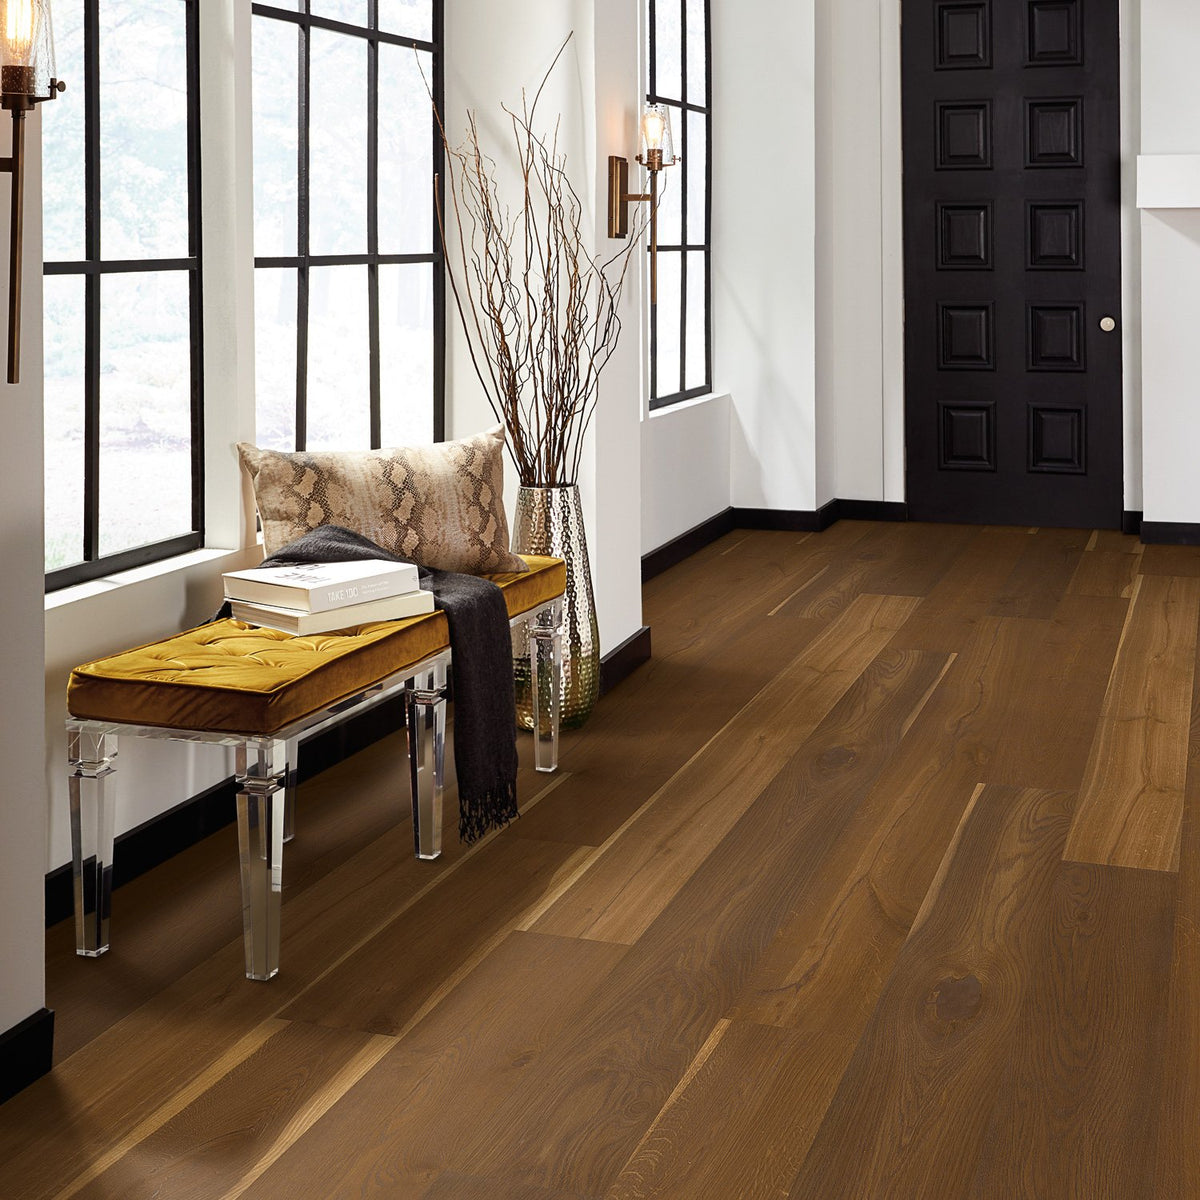 Fabrica - Wide Plank - Chateau Collection - Rouze